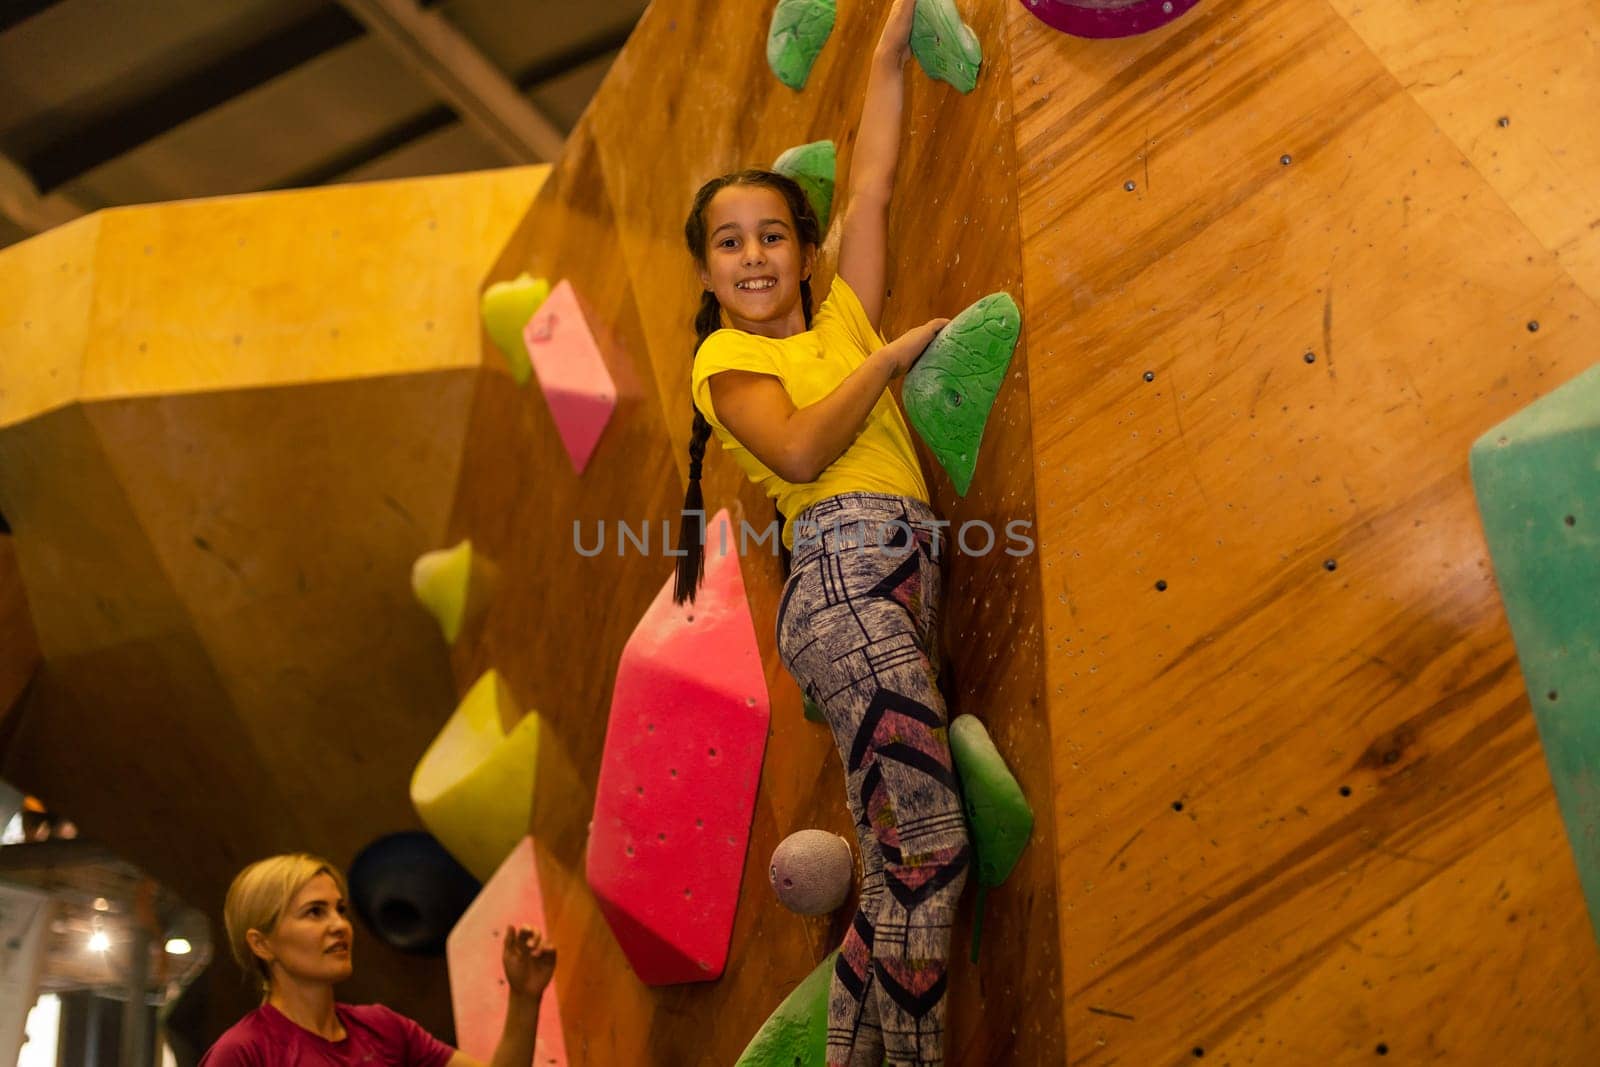 little girl climbing a rock wall indoor by Andelov13